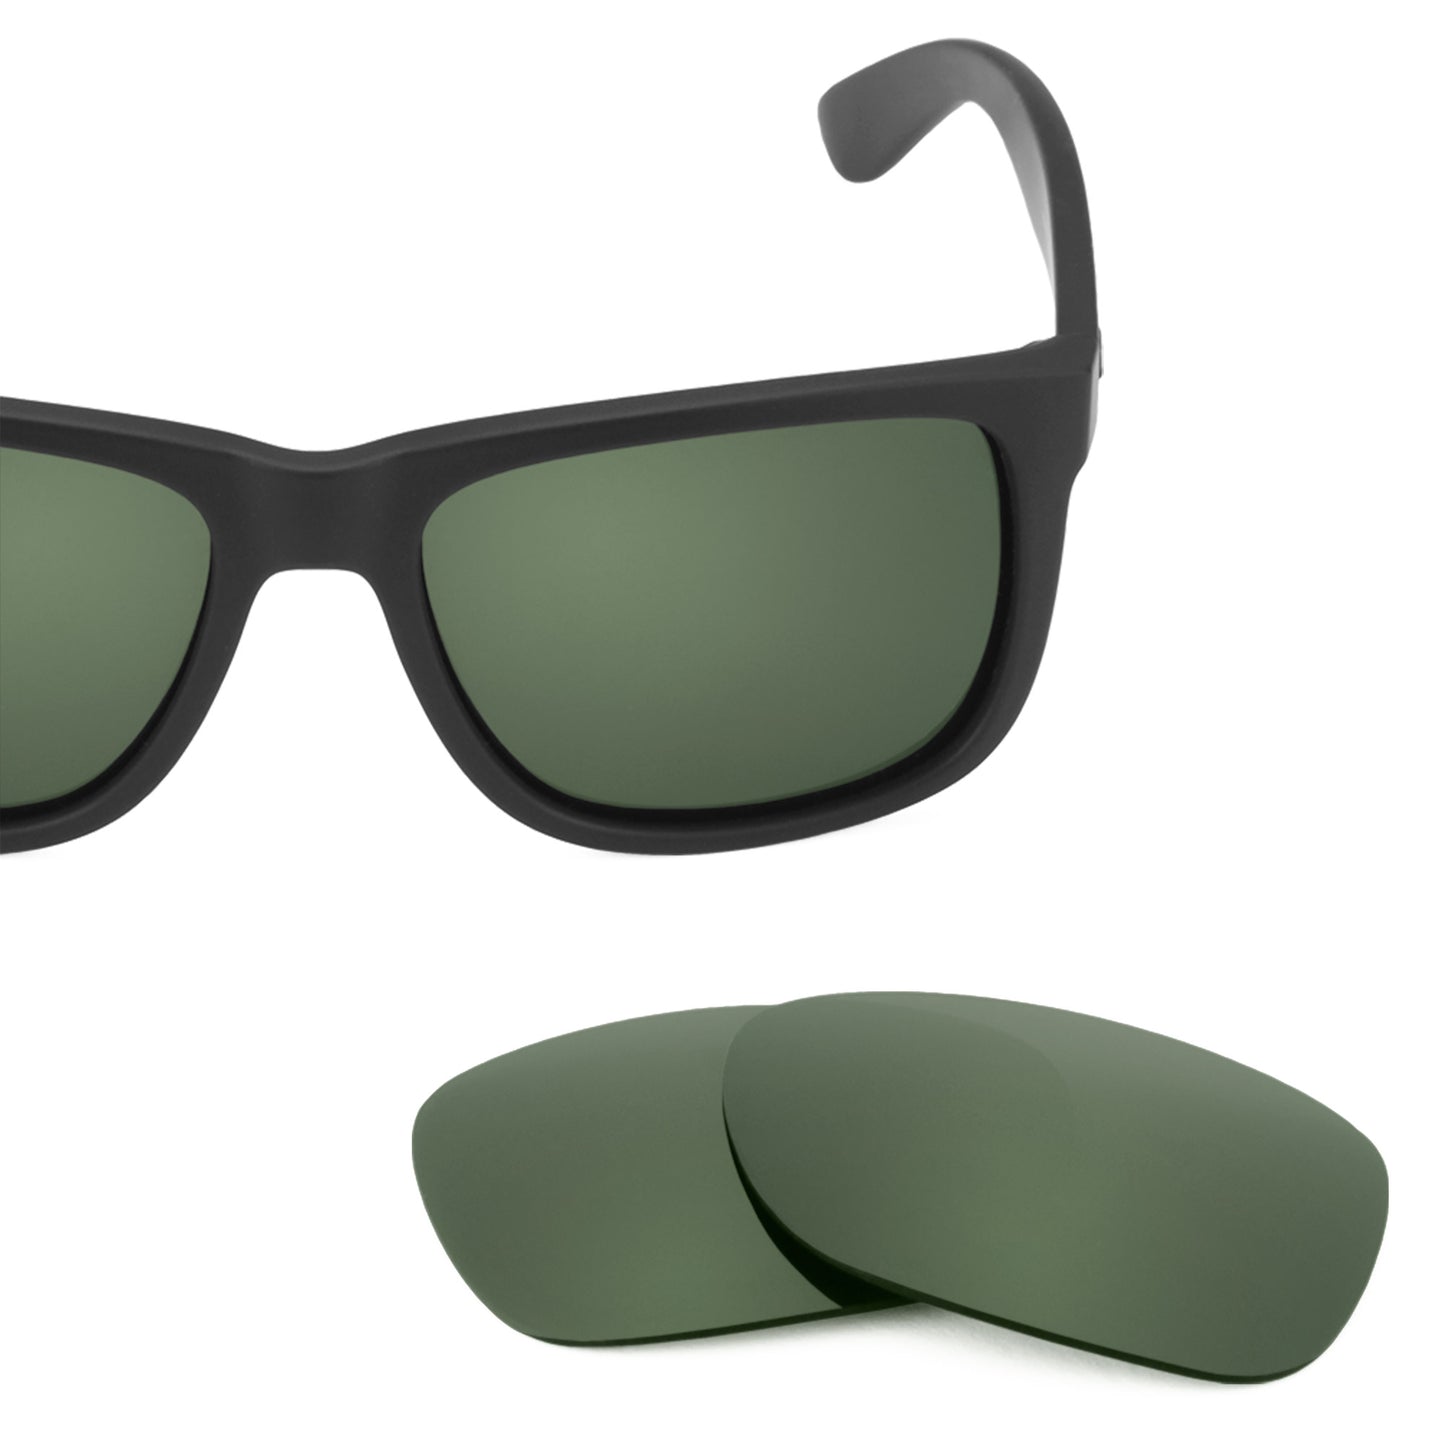 Revant replacement lenses for Ray-Ban Justin RB4165 54mm Polarized Gray Green